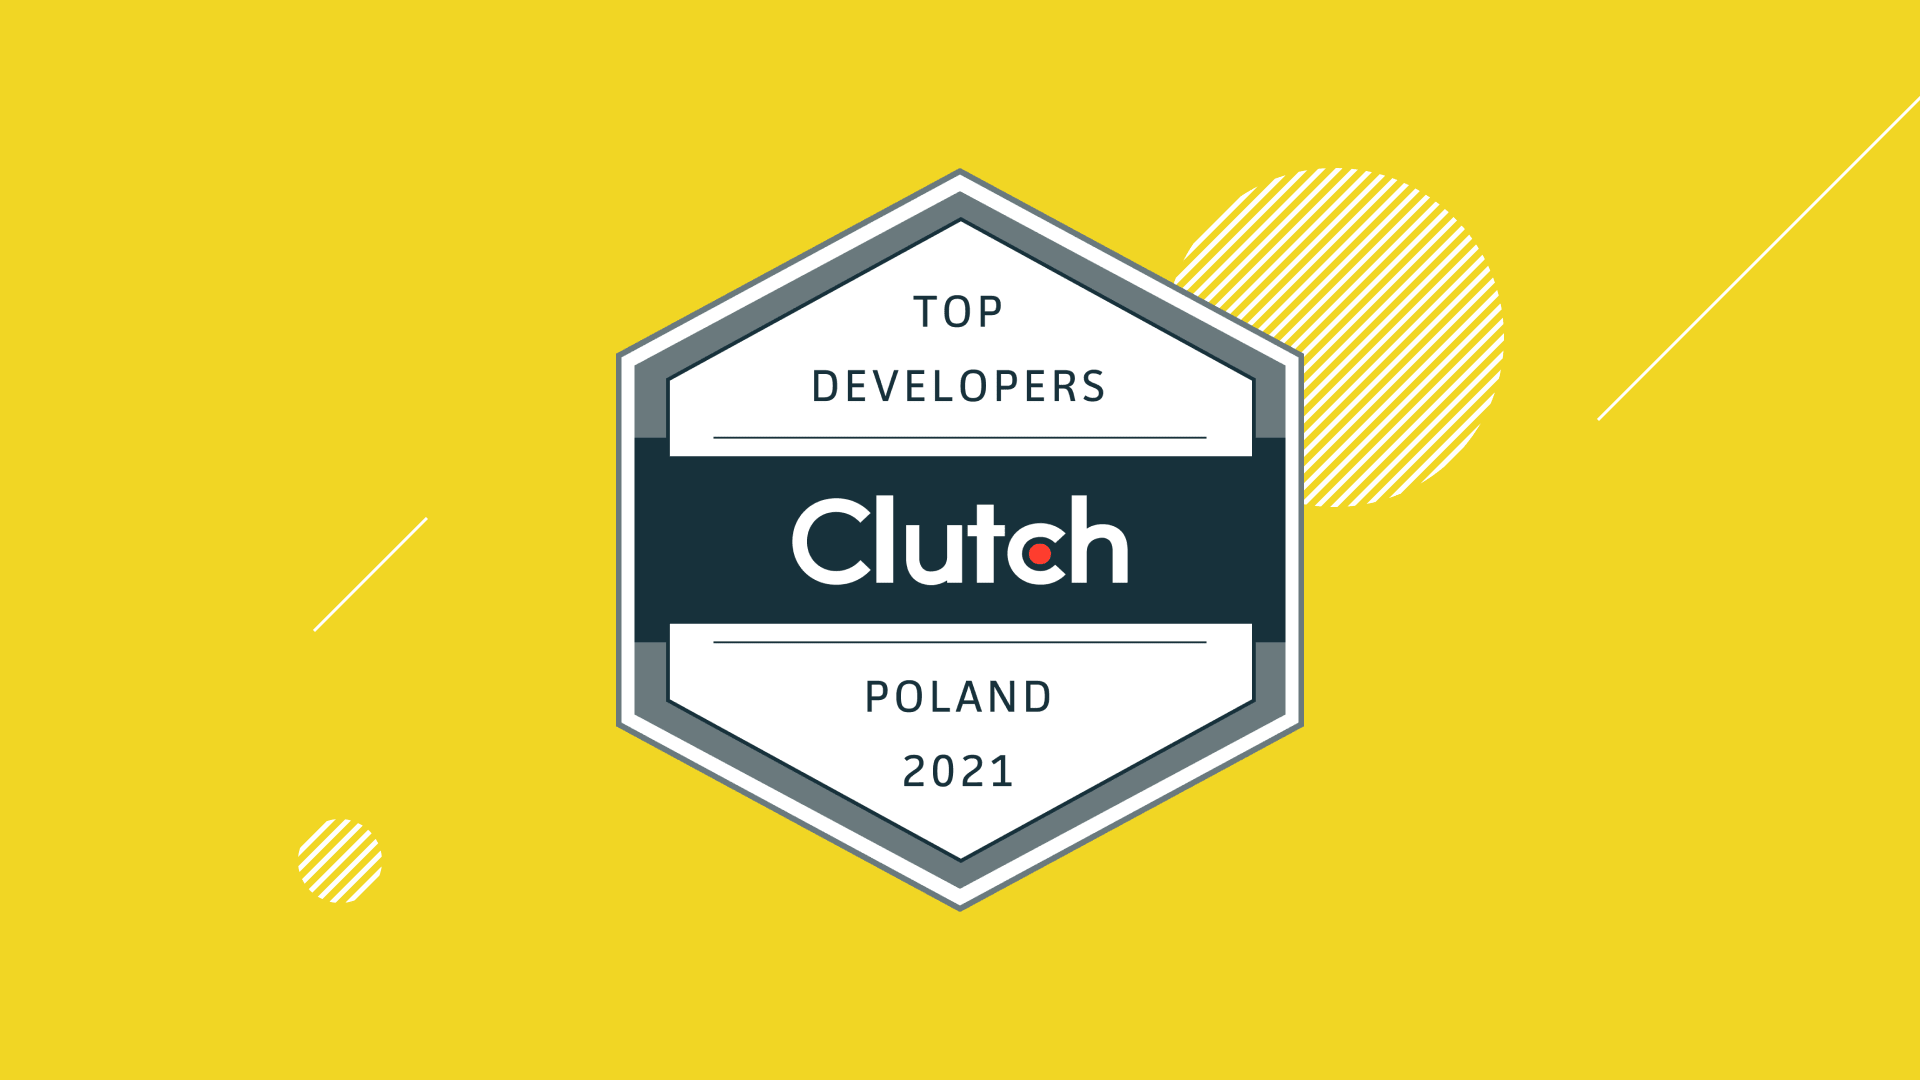  Clutch names Boldare as Leading Web Development Firm for 2021